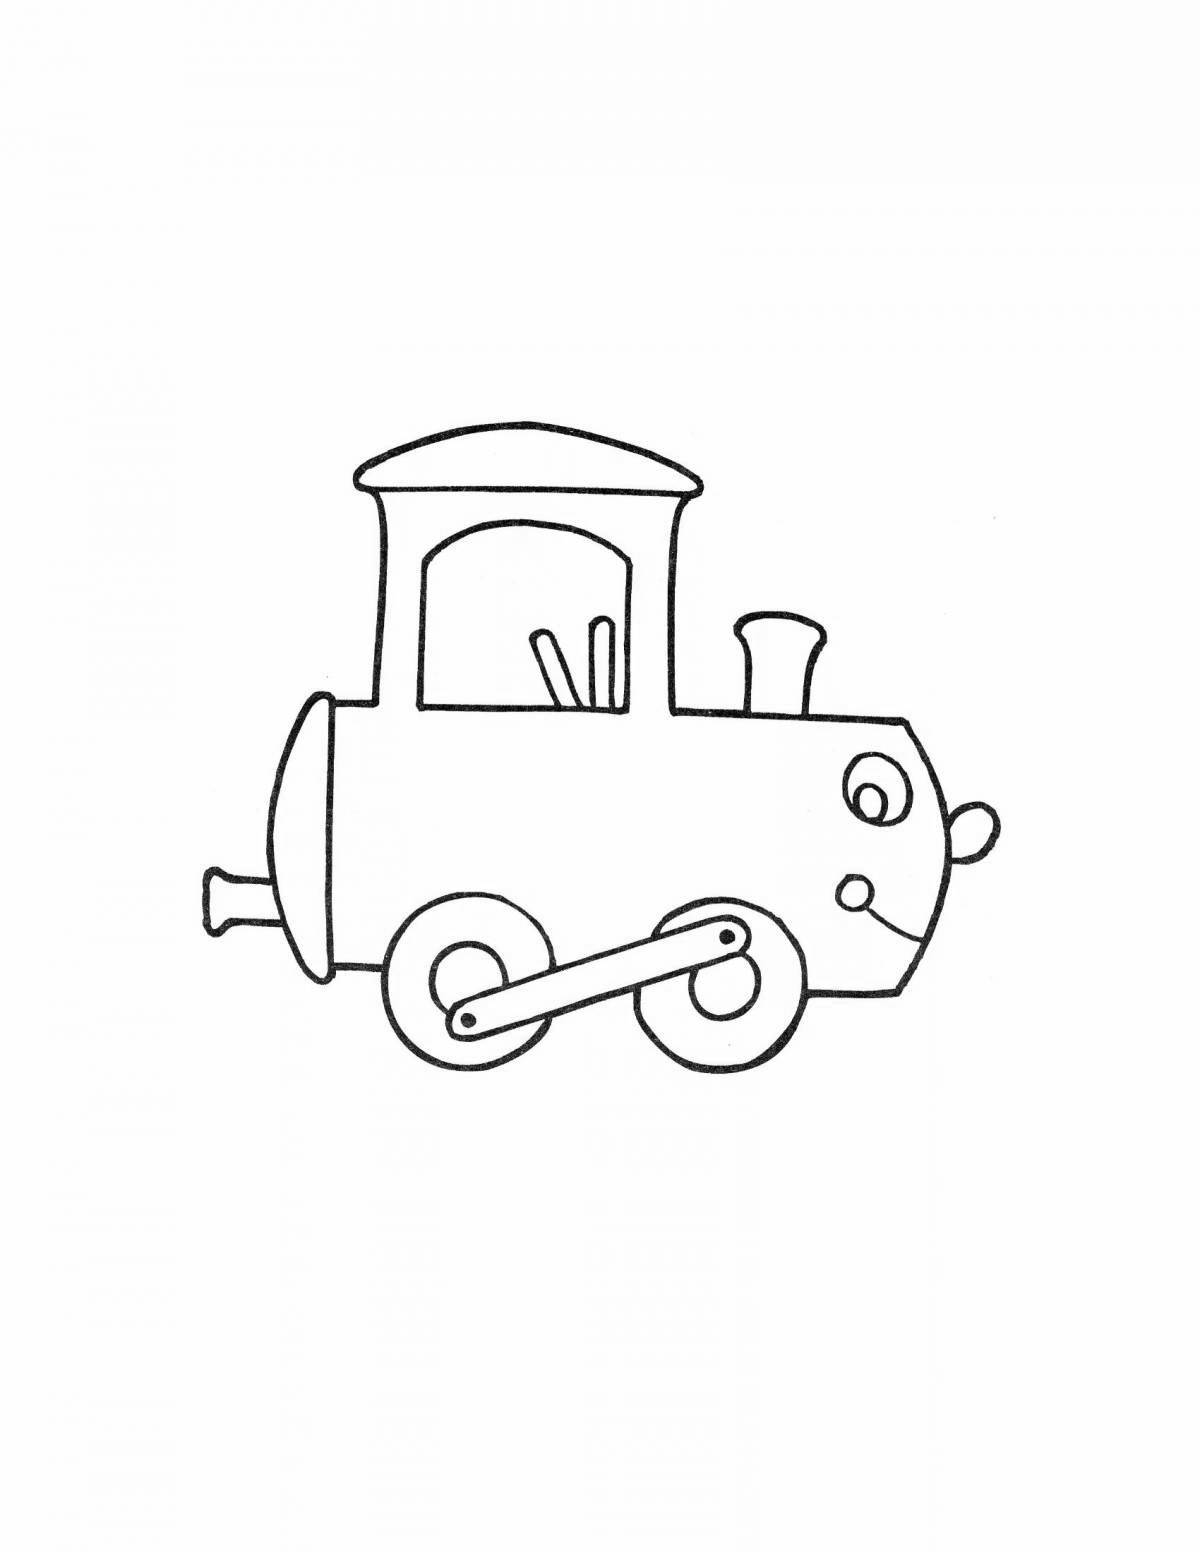 Great steam locomotive coloring pages for kids